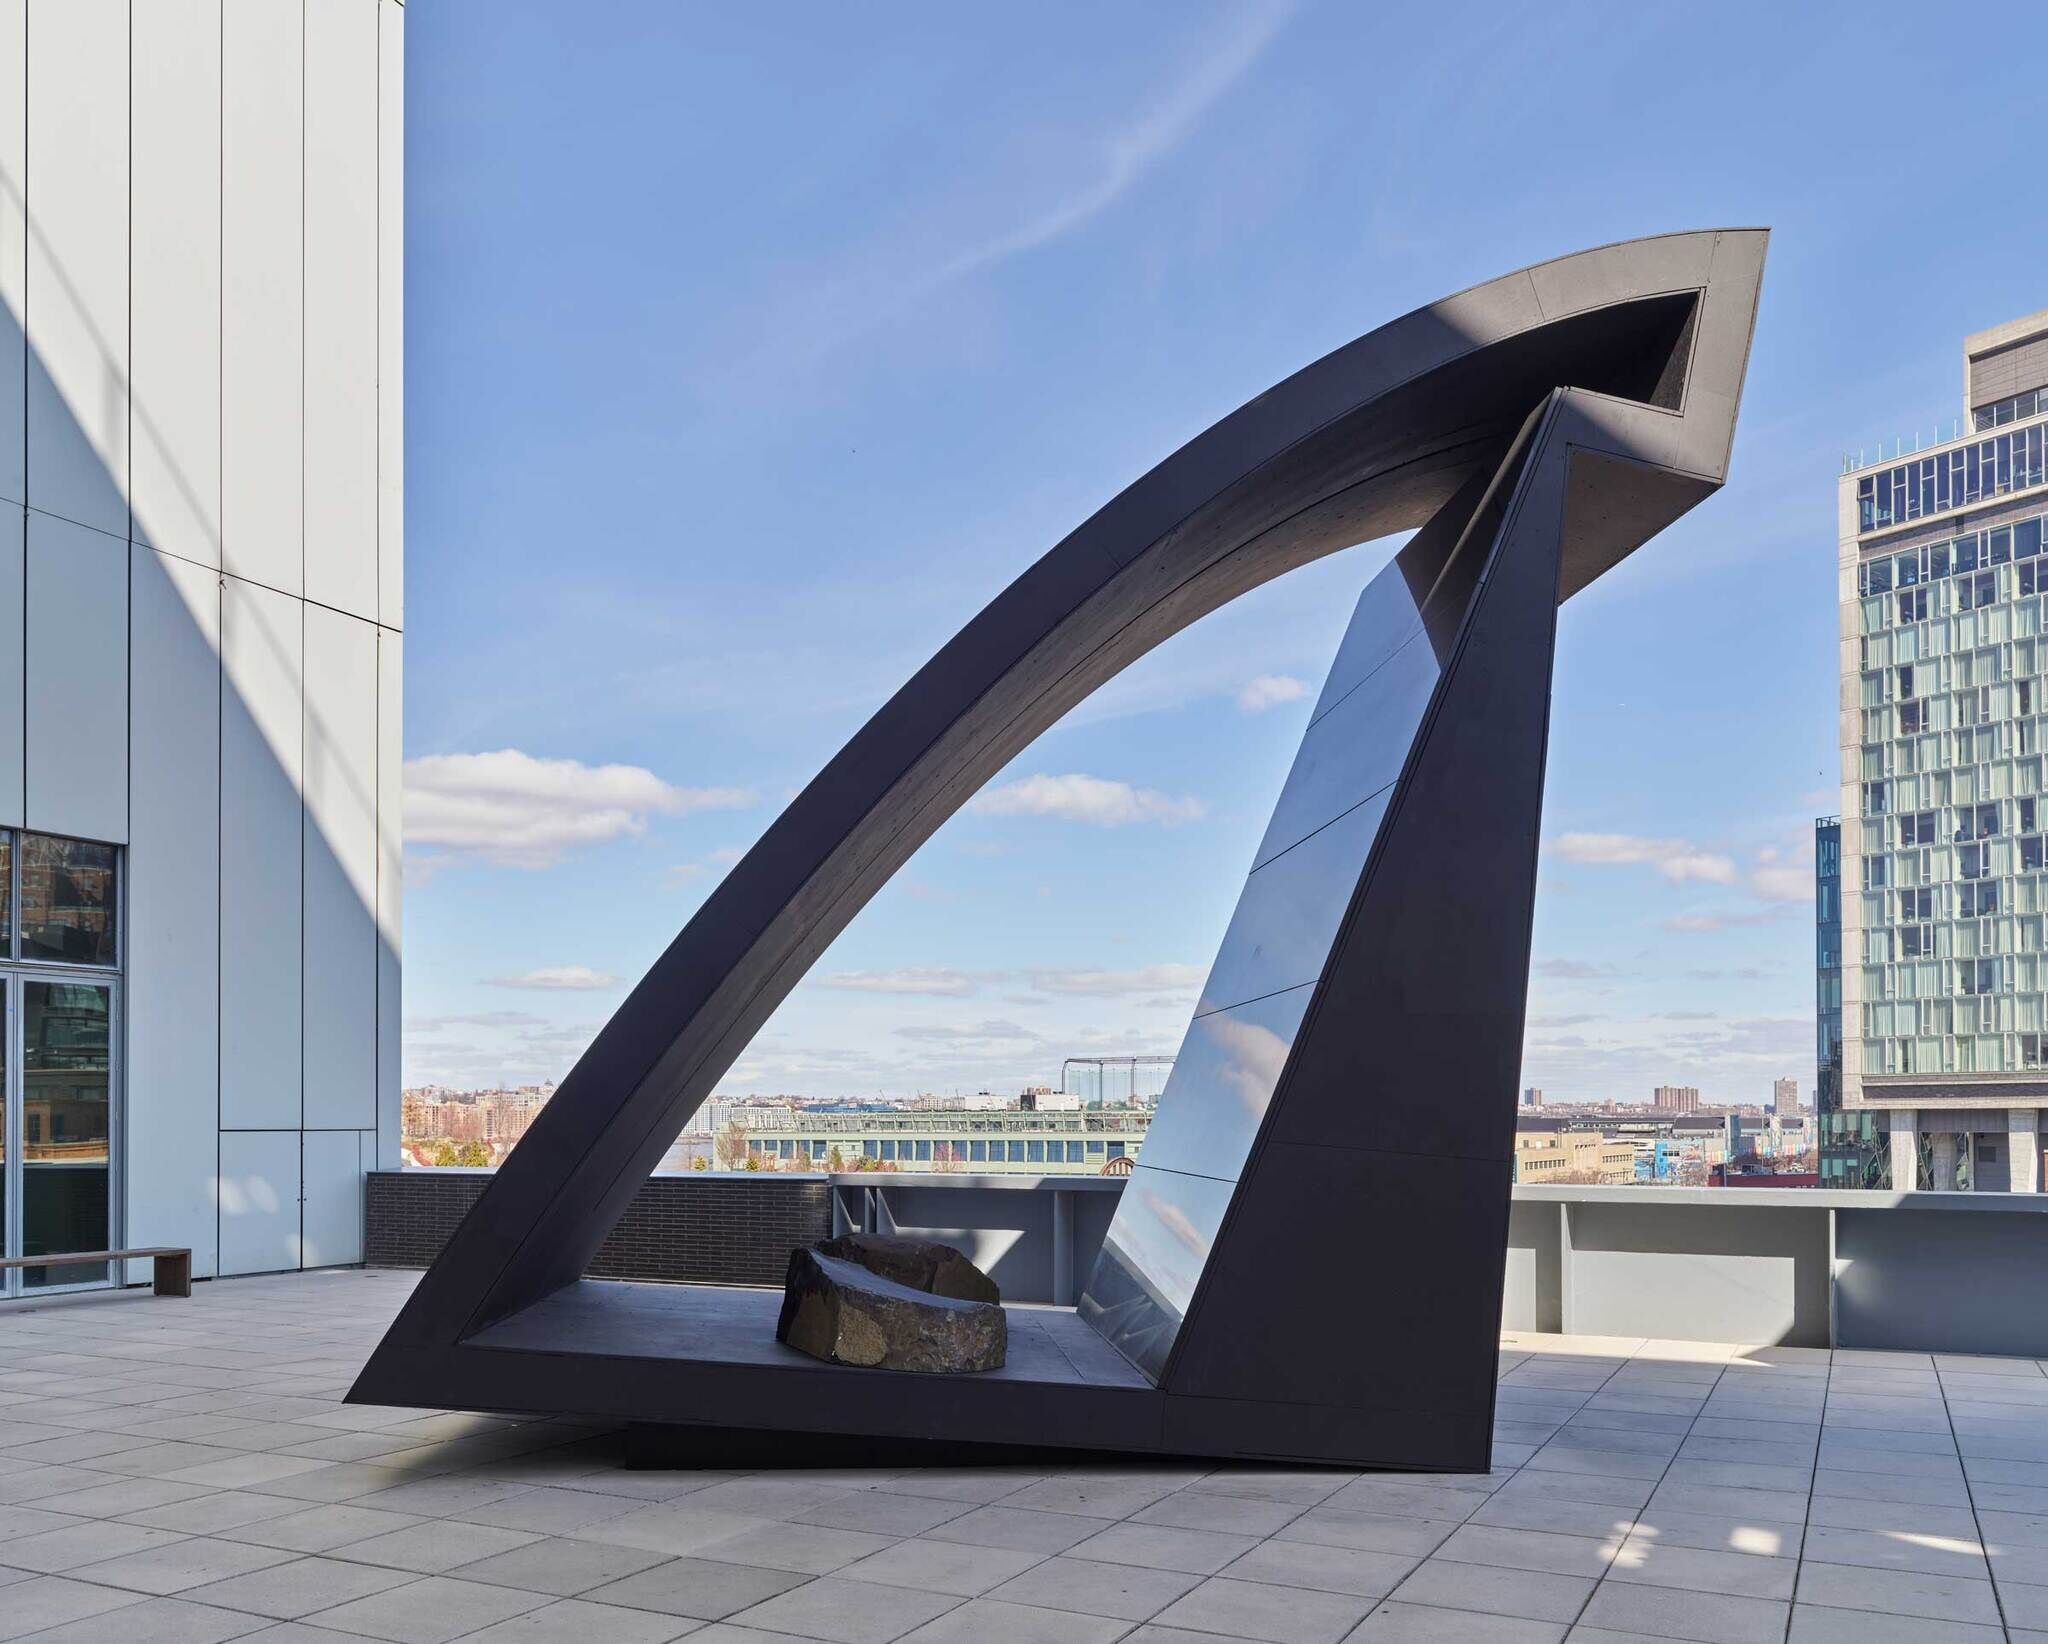 Modern outdoor sculpture resembling a stylized triangular portal, with city skyline and blue sky in the background.